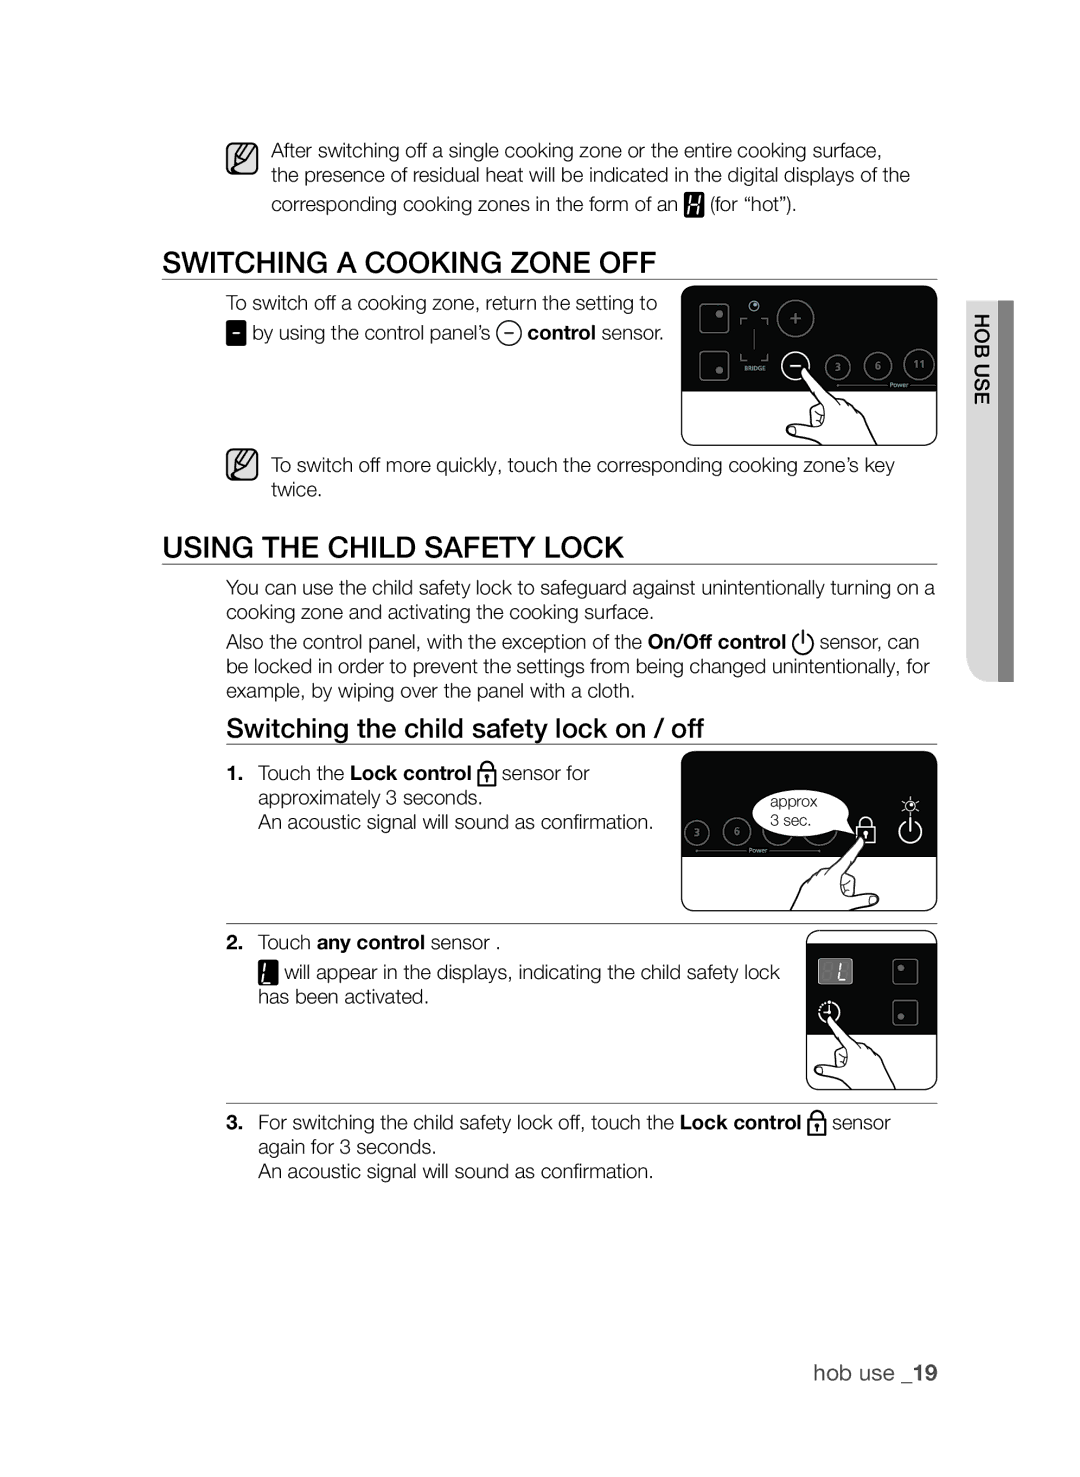 Samsung CTI613GIN/XEO SwITChInG a CookInG zone off, UsInG The ChIld safeTy loCk, Switching the child safety lock on / off 